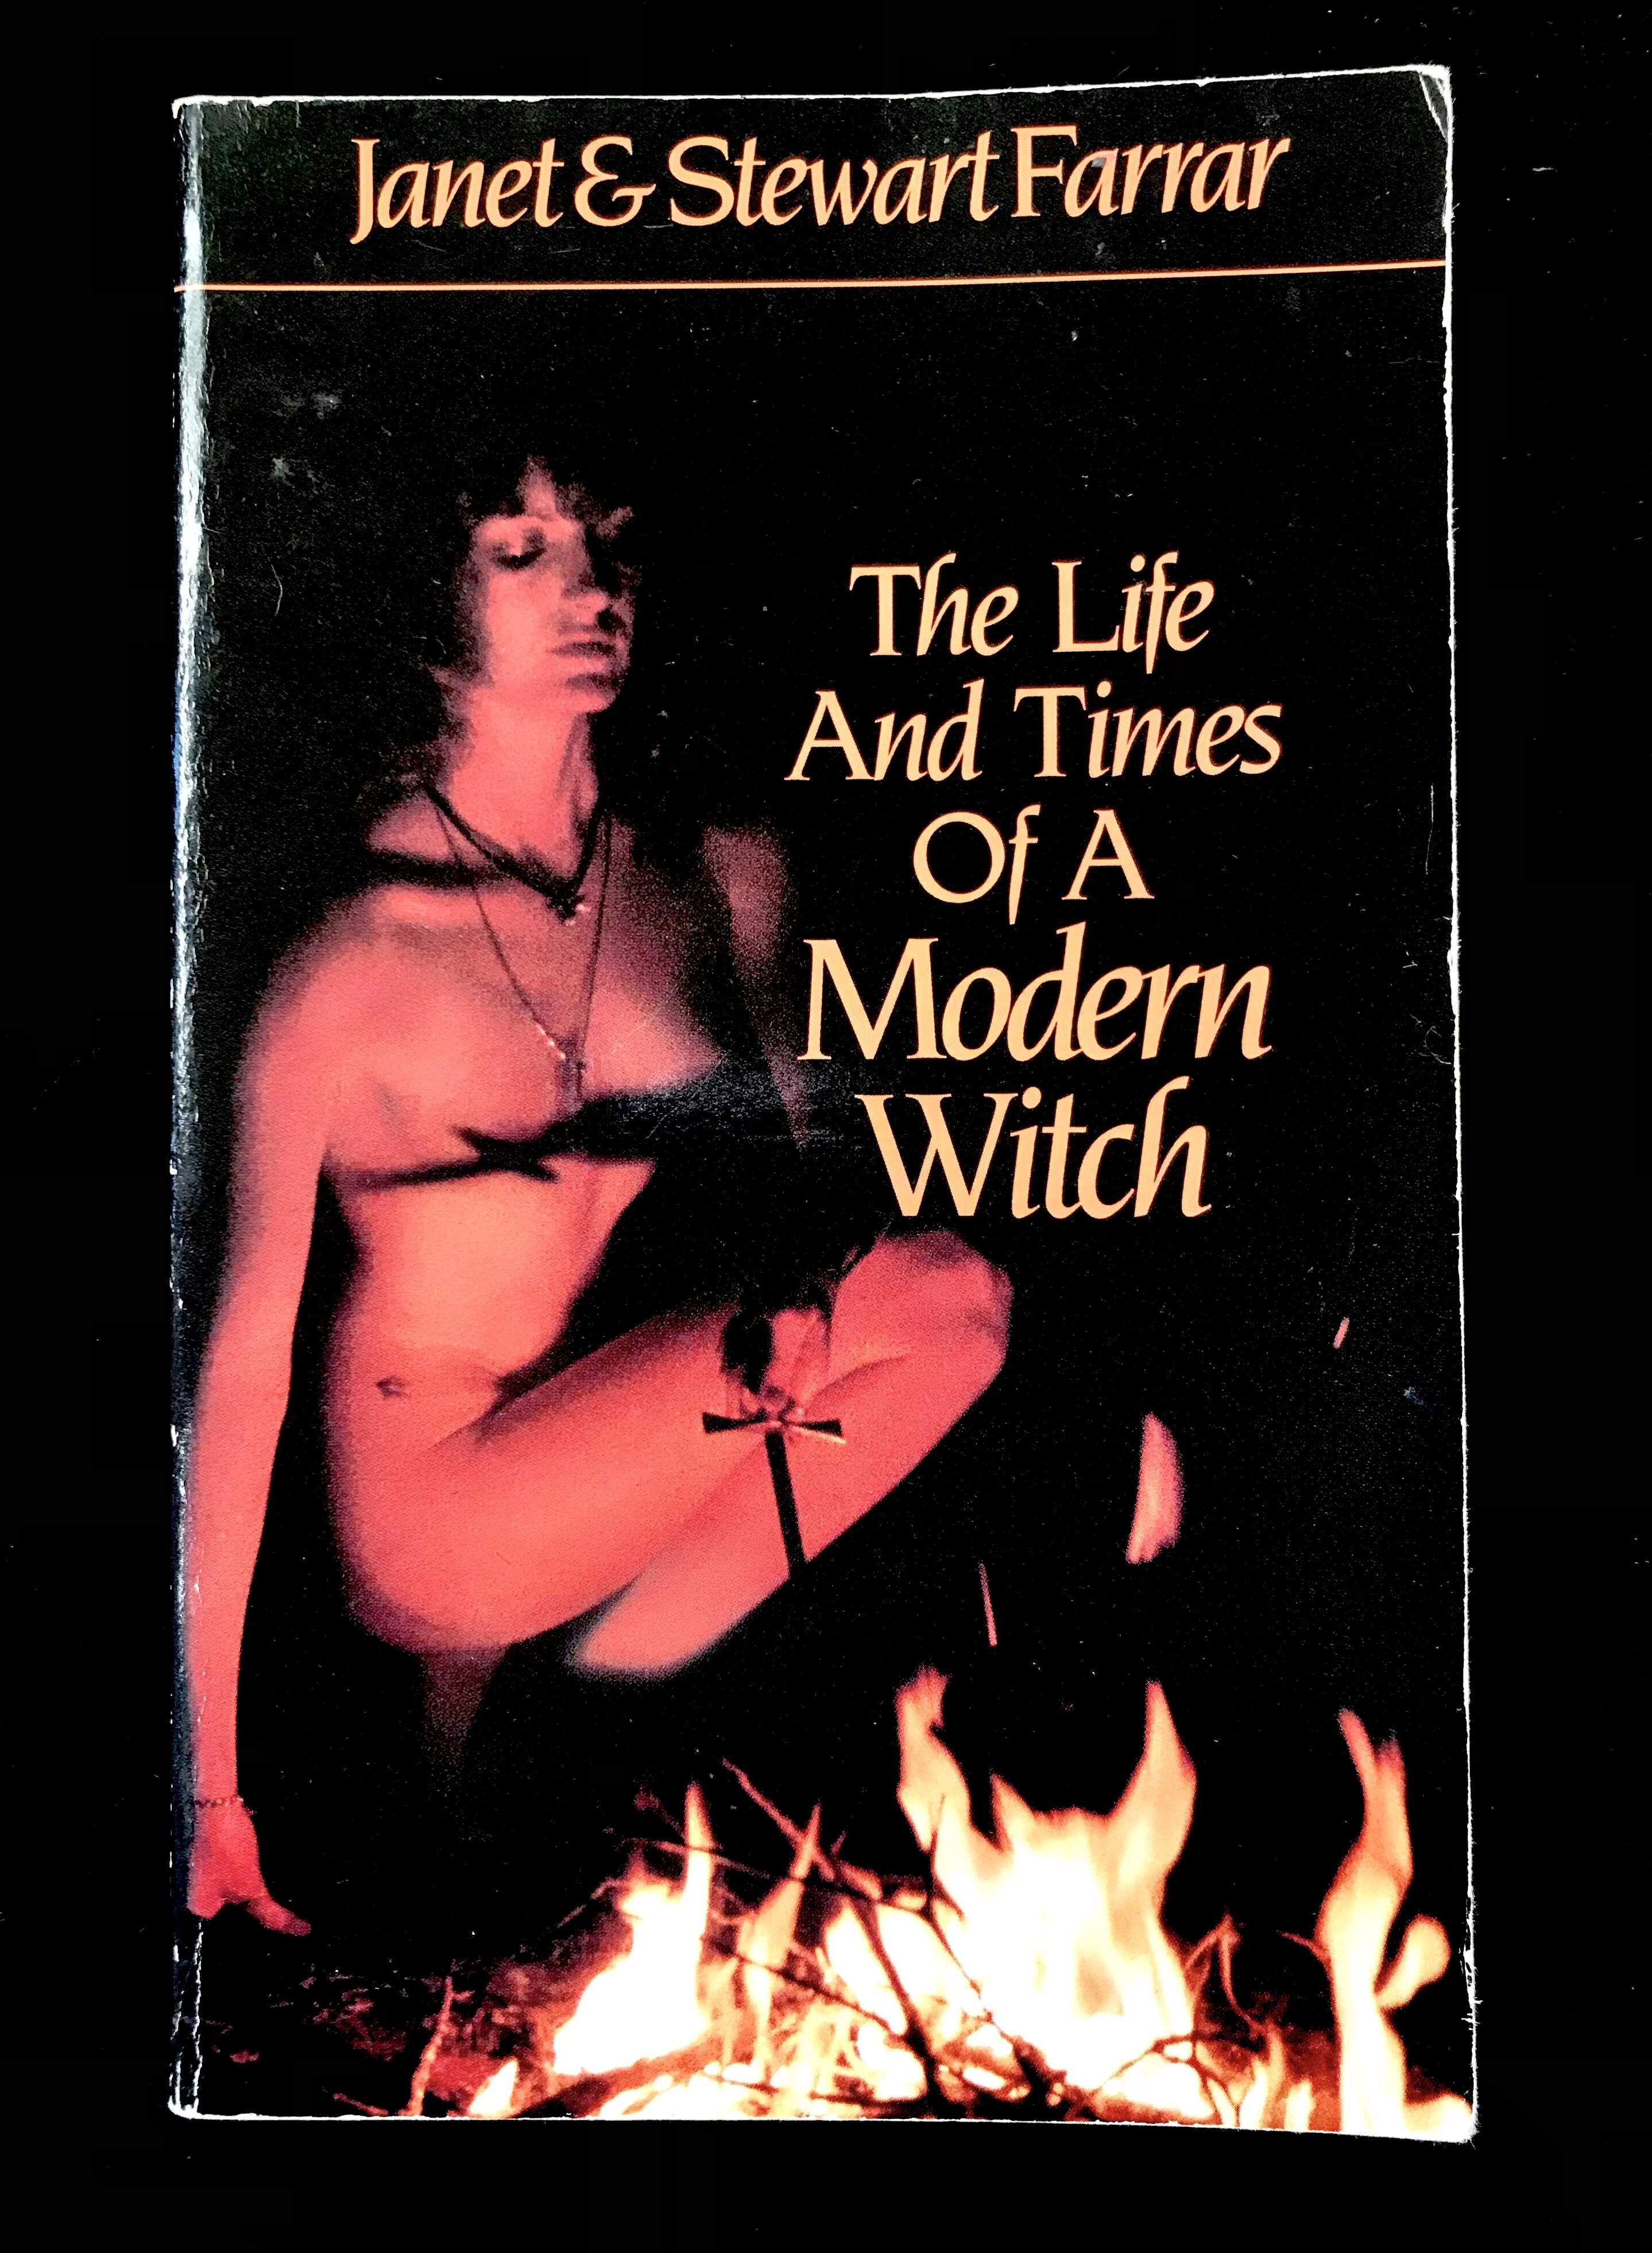 The Life & Times Of A Modern Witch by Janet & Stewart Farrar